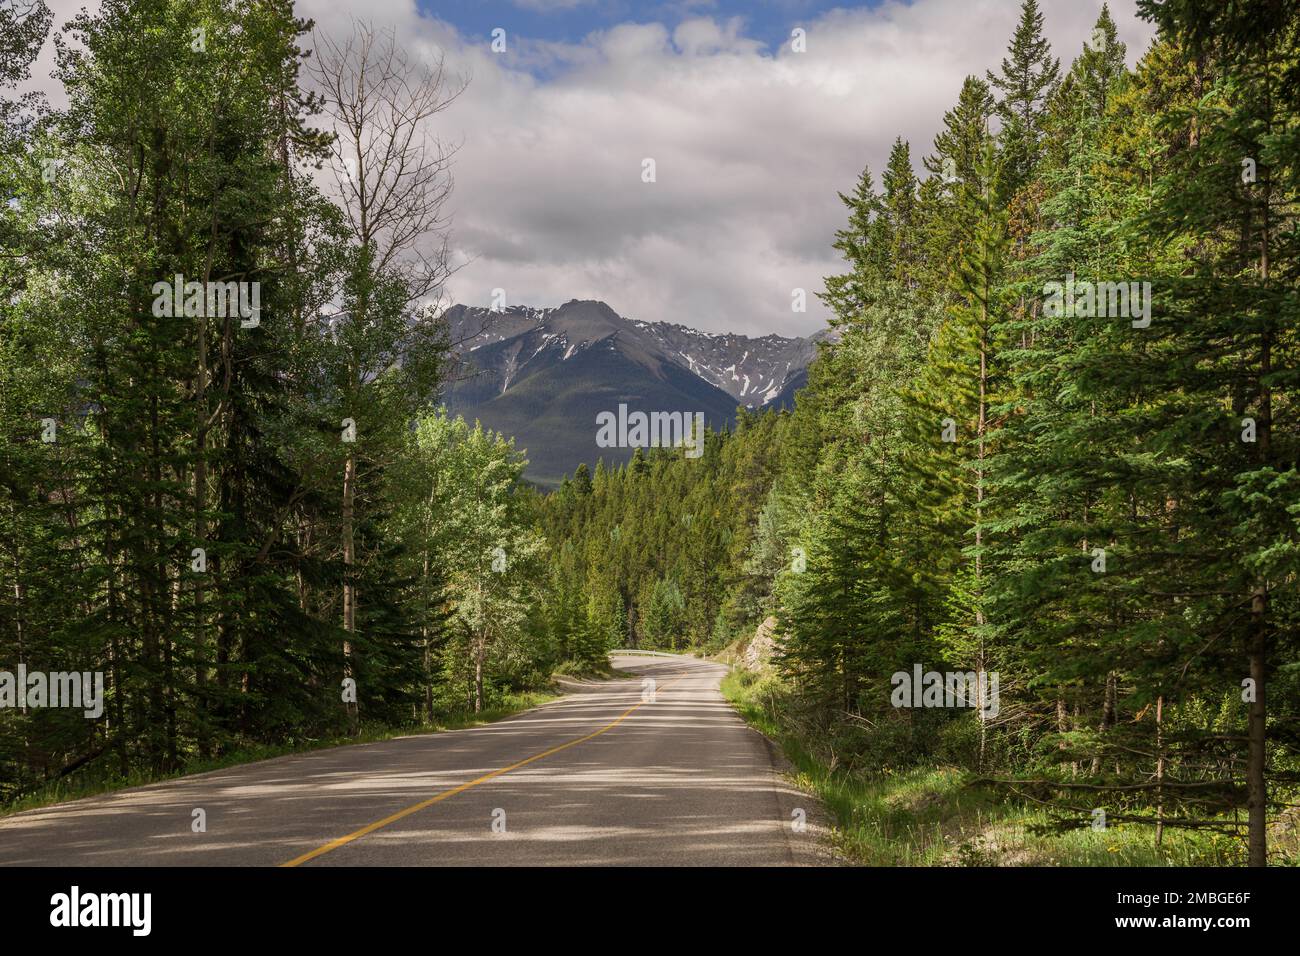 Mountain road. Travel background. Highway in mountains. Transportation. Landscape with rocks, sunny sky with clouds and beautiful asphalt road in the Stock Photo